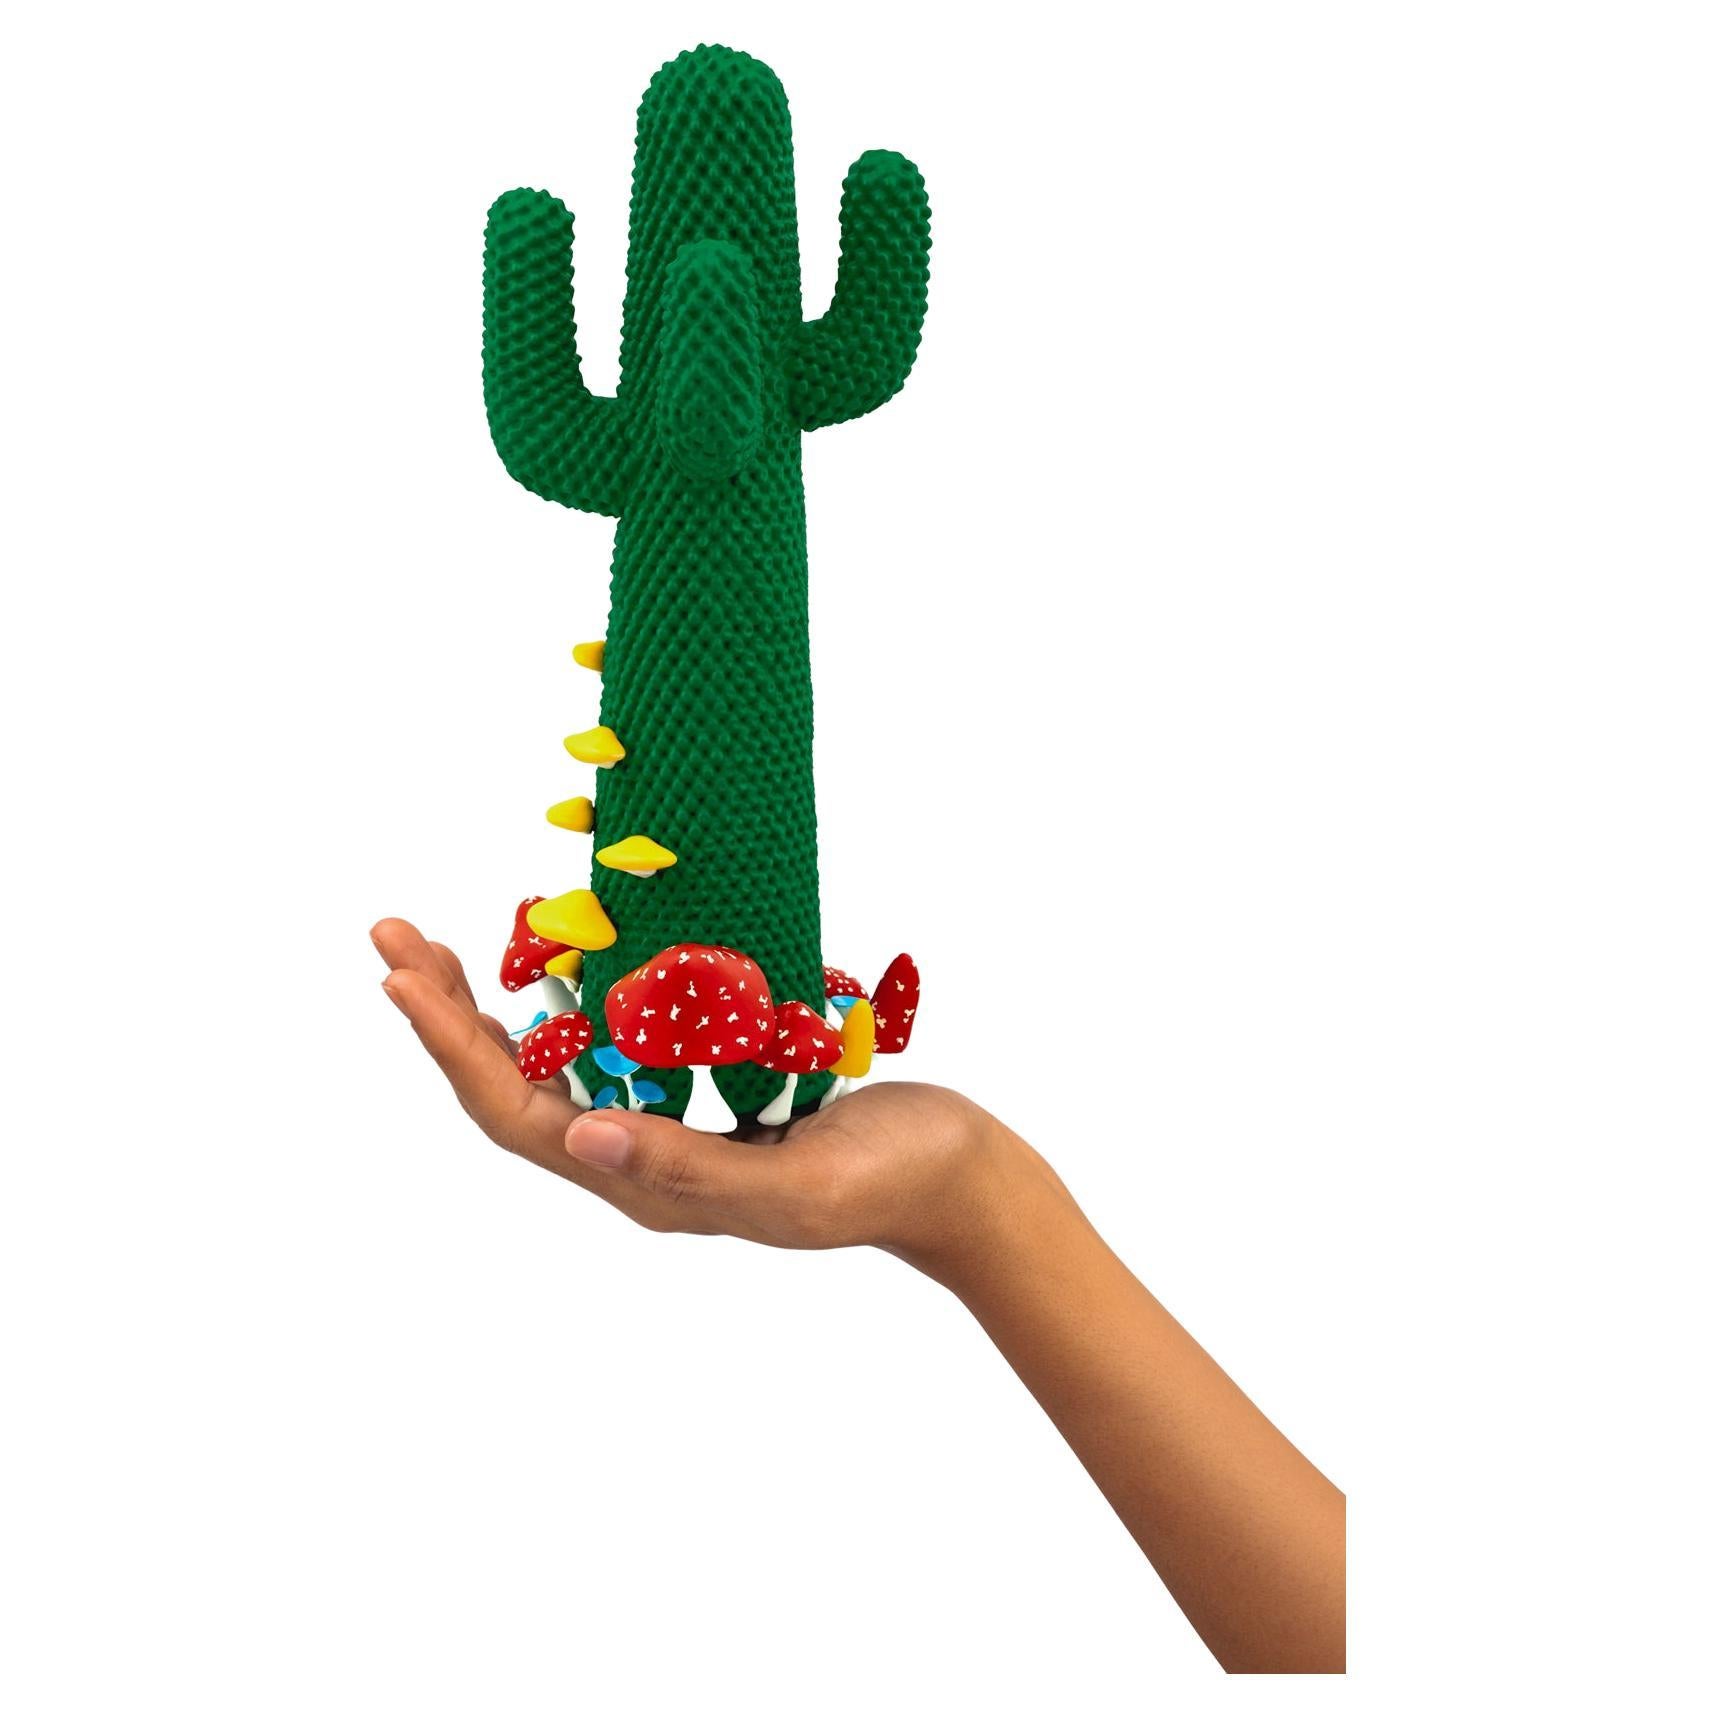 LIMITED EDITION #87/99

Gufram presents the miniaturised version of the Shroom CACTUS® created in collaboration with A$AP Rocky and the artist’s new design studio HOMMEMADE Exactly as the real-size Shroom CACTUS®, the new Guframini piece features